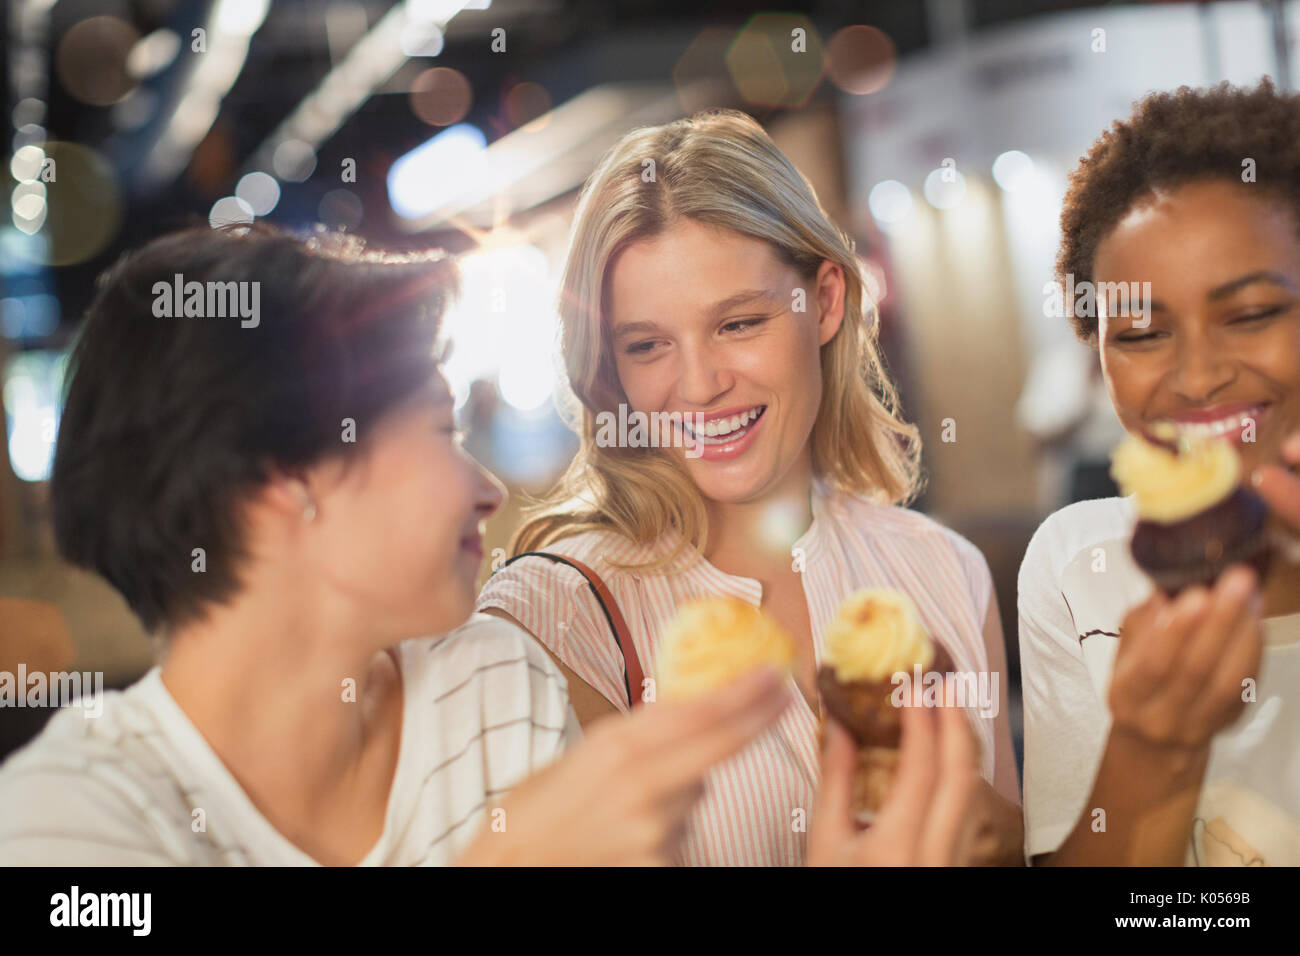 Young women eating cupcakes Stock Photo